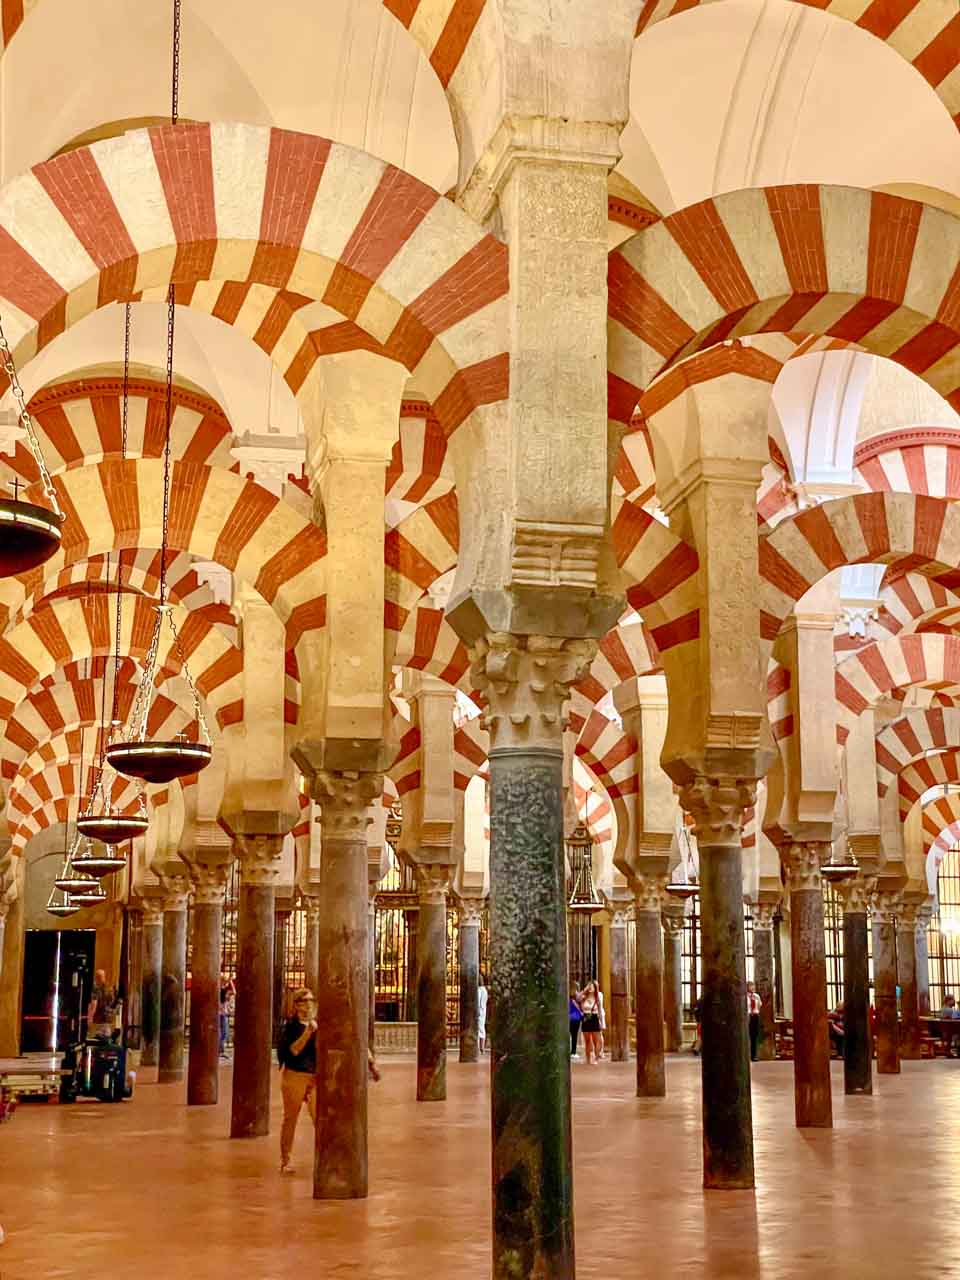 Several Islamic double-arched columns in a section of the Mosque-Cathedral of Cordoba.